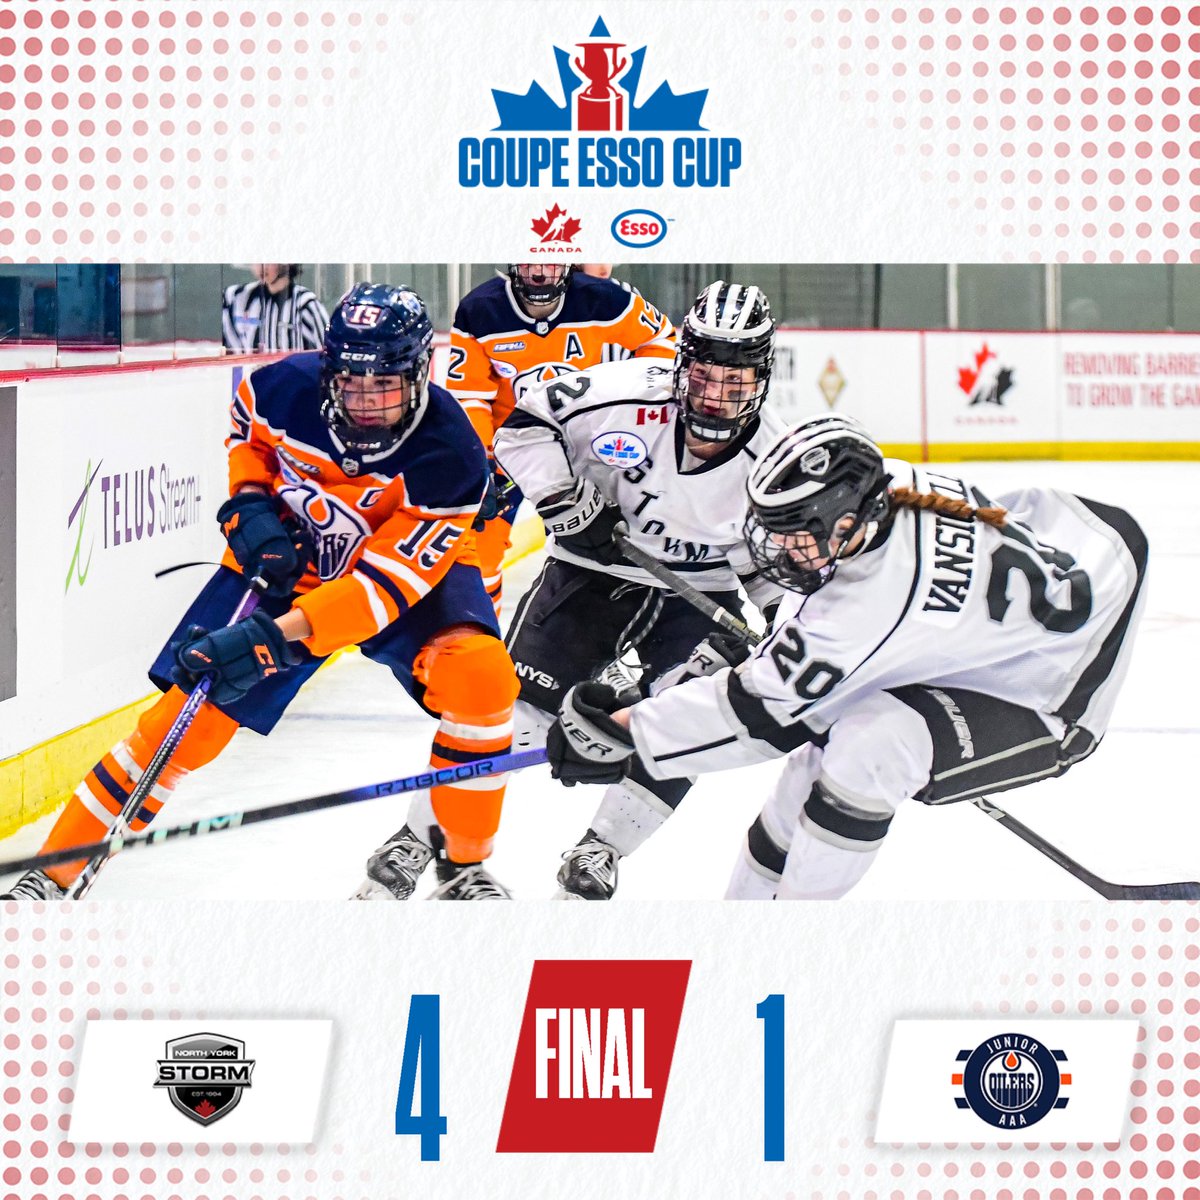 GAME OVER! The @nyshockey are off to the gold medal game with a win over the @jroilerswhite.   MATCH FINI! Le @nyshockey accède aux quarts de finale grâce à un gain contre les @jroilerswhite.   📊 hc.hockey/EssoStats2416 📊 hc.hockey/StatsEsso2416   #EssoCup | #CoupeEsso